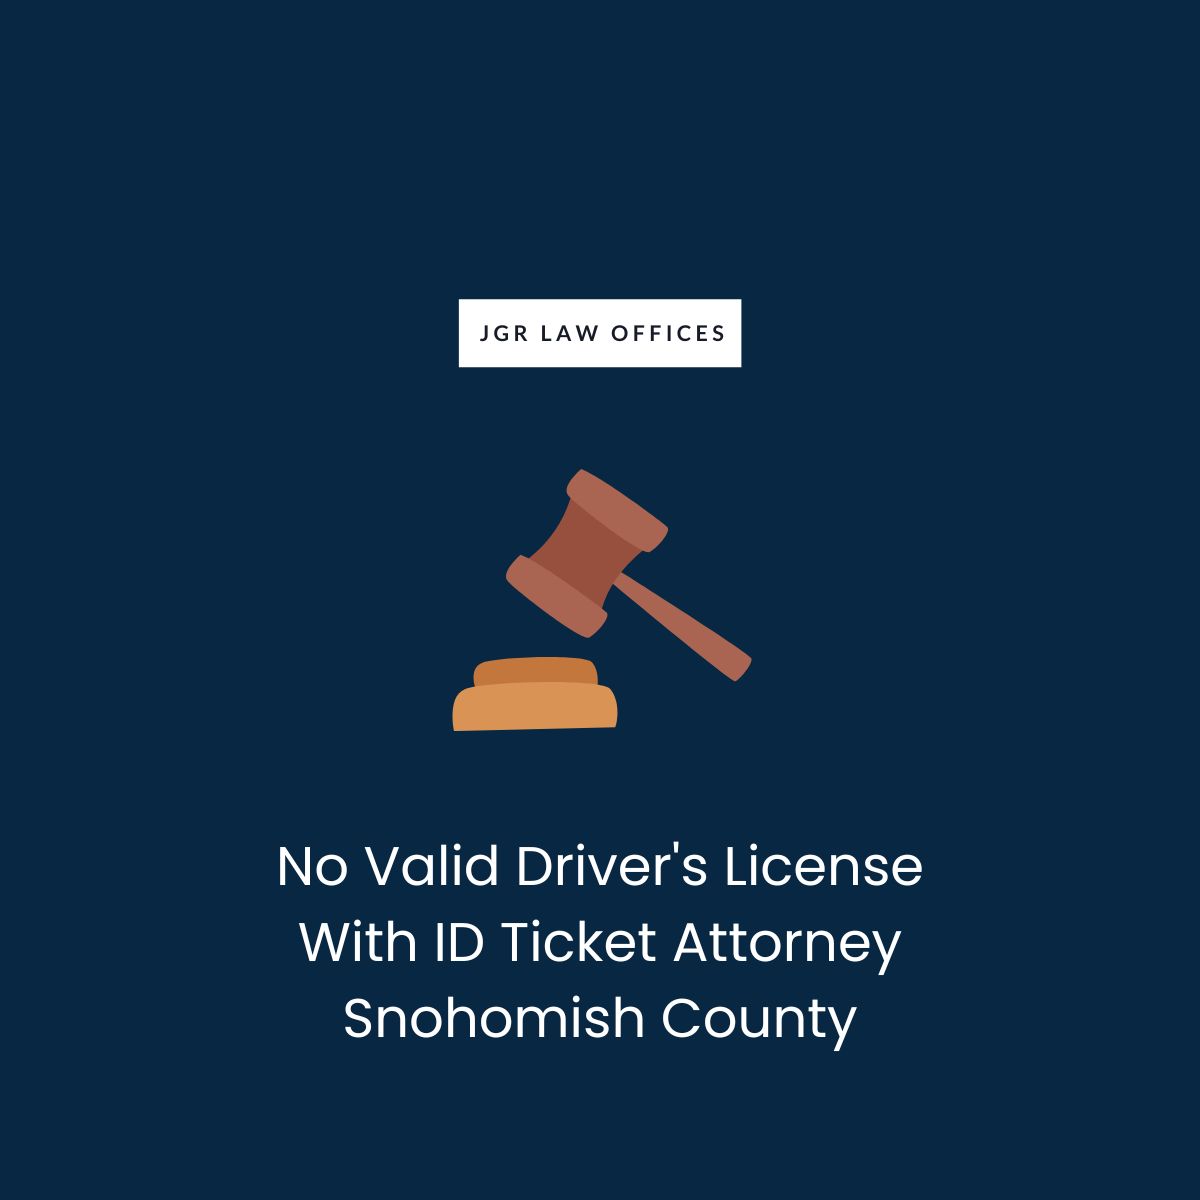 No Valid Driver's License With ID Ticket Attorney Snohomish County